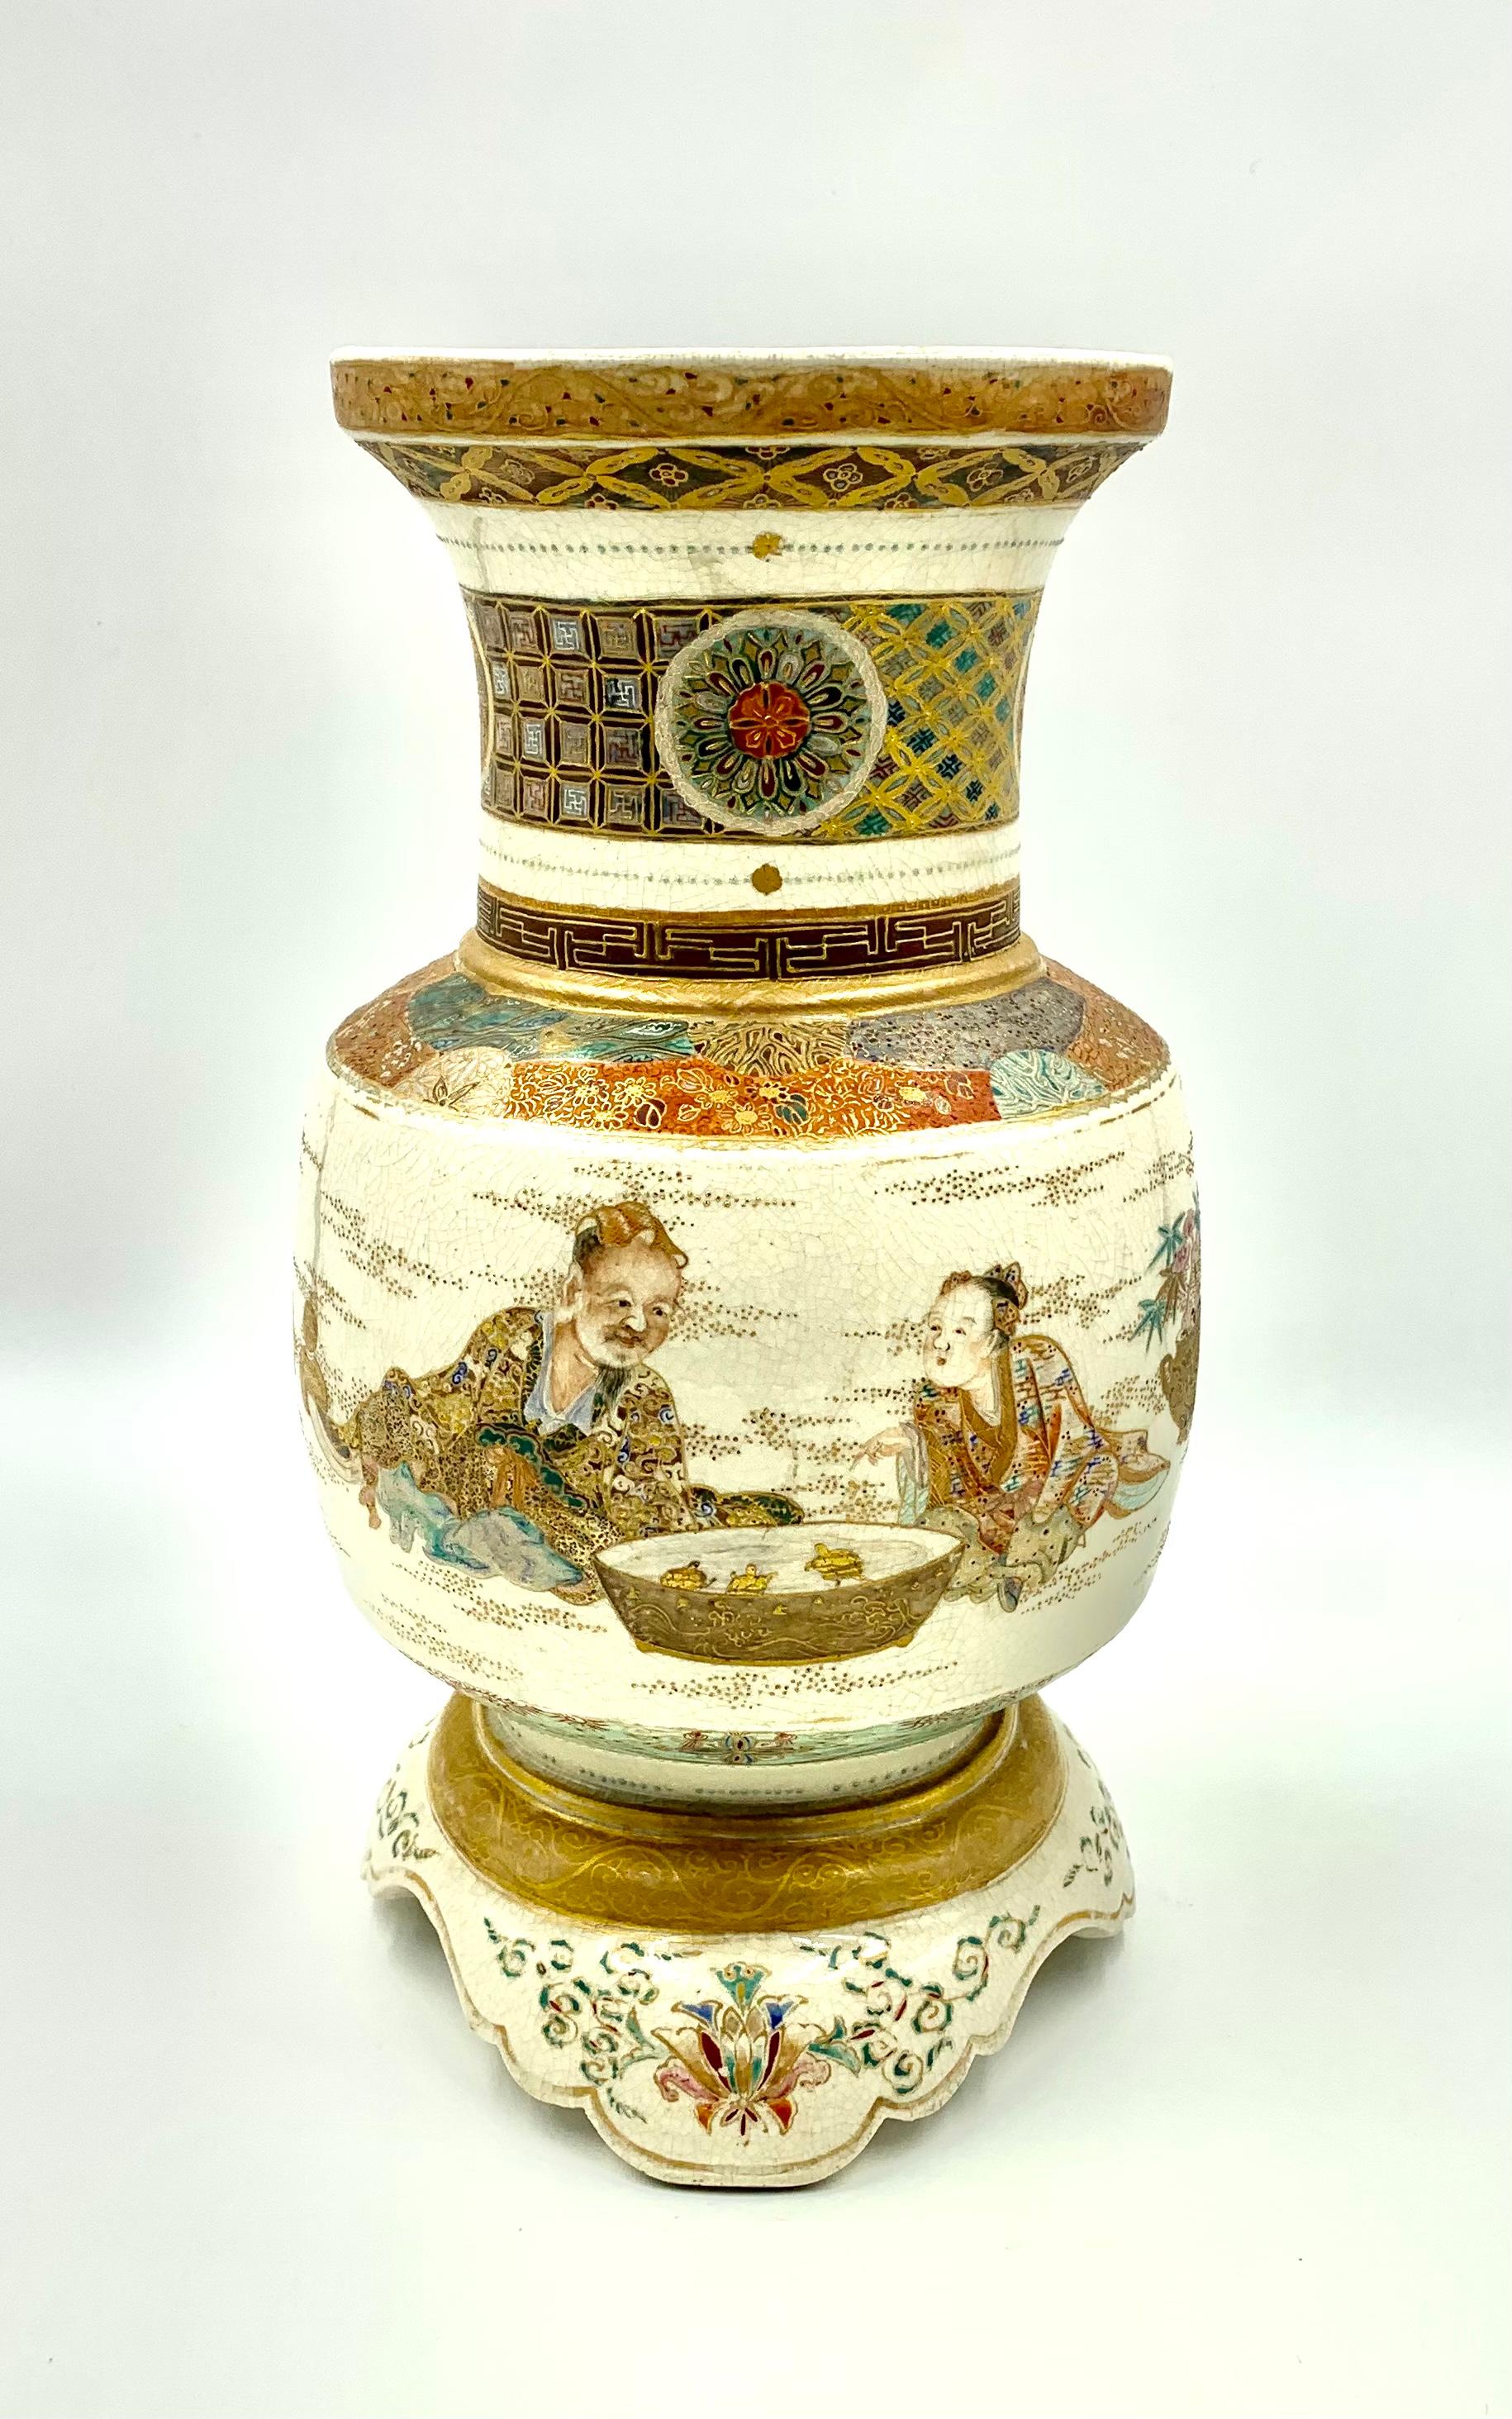 Rare Antique Japanese Satsuma Vase with Scenes of Figures, Turtle Basin, Reading For Sale 4